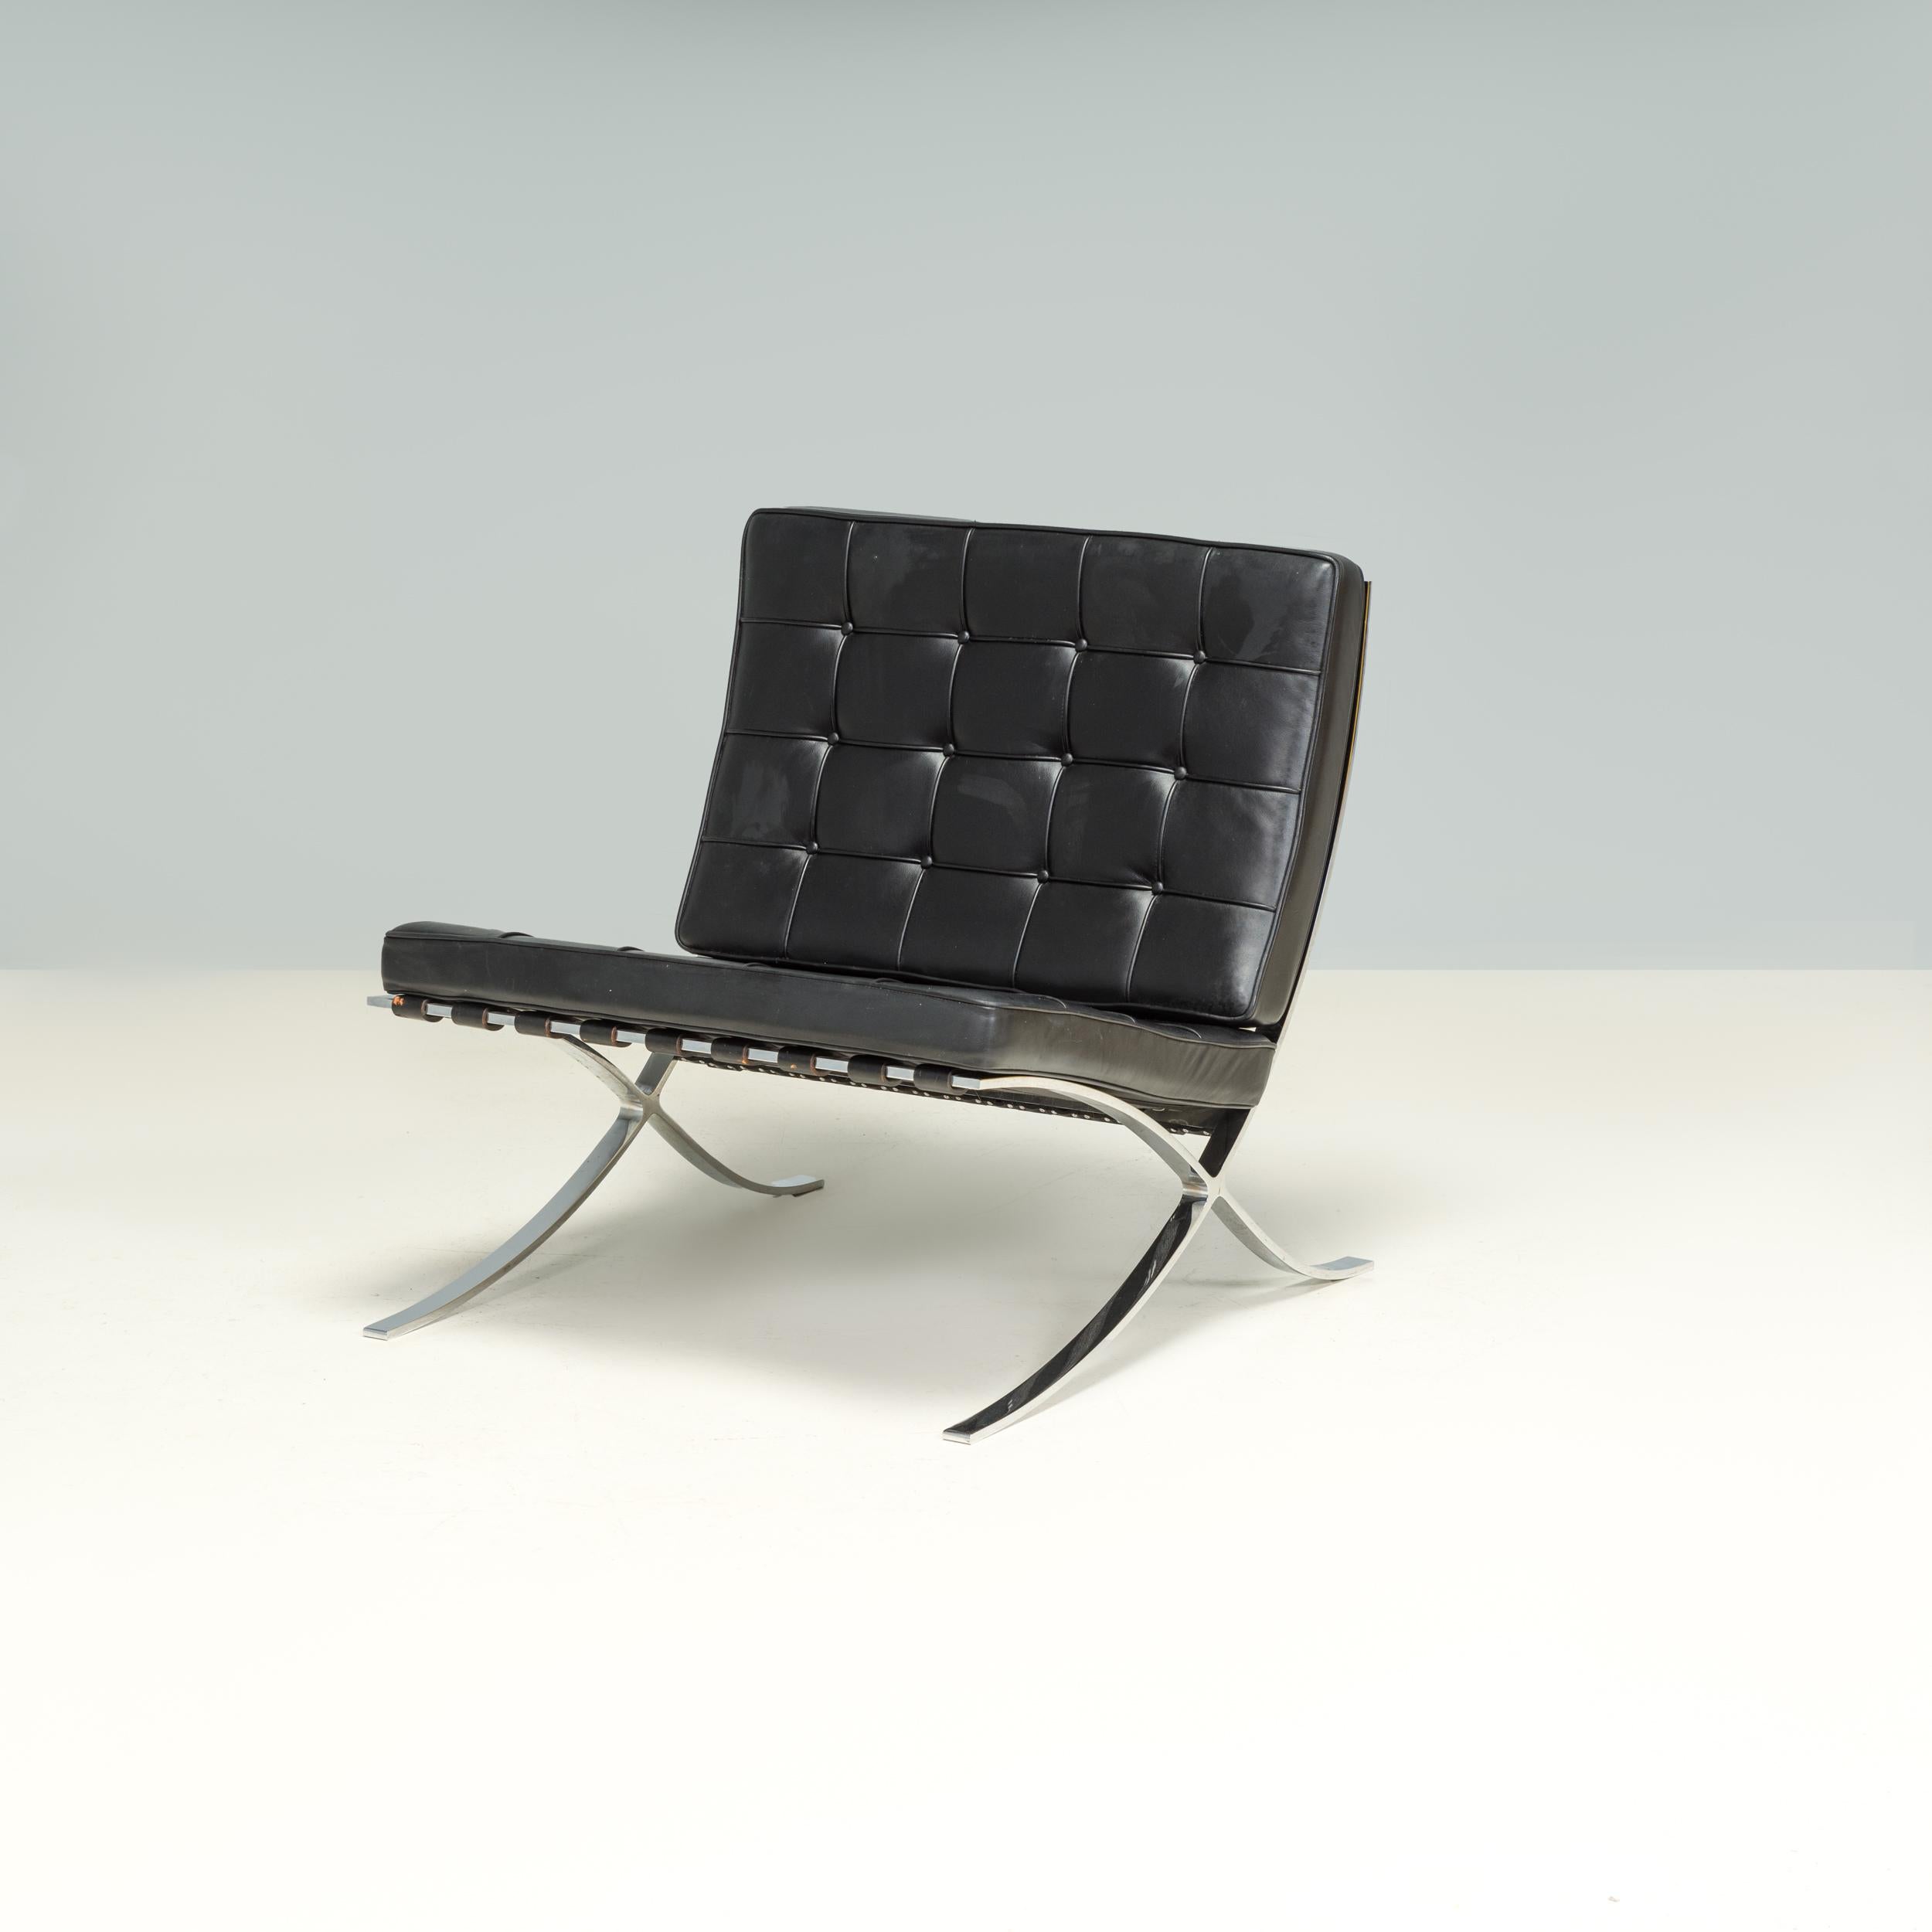 Early 20th Century Knoll by Ludwig Mies Van der Rohe & Lilly Reich Black Leather Barcelona Armchair